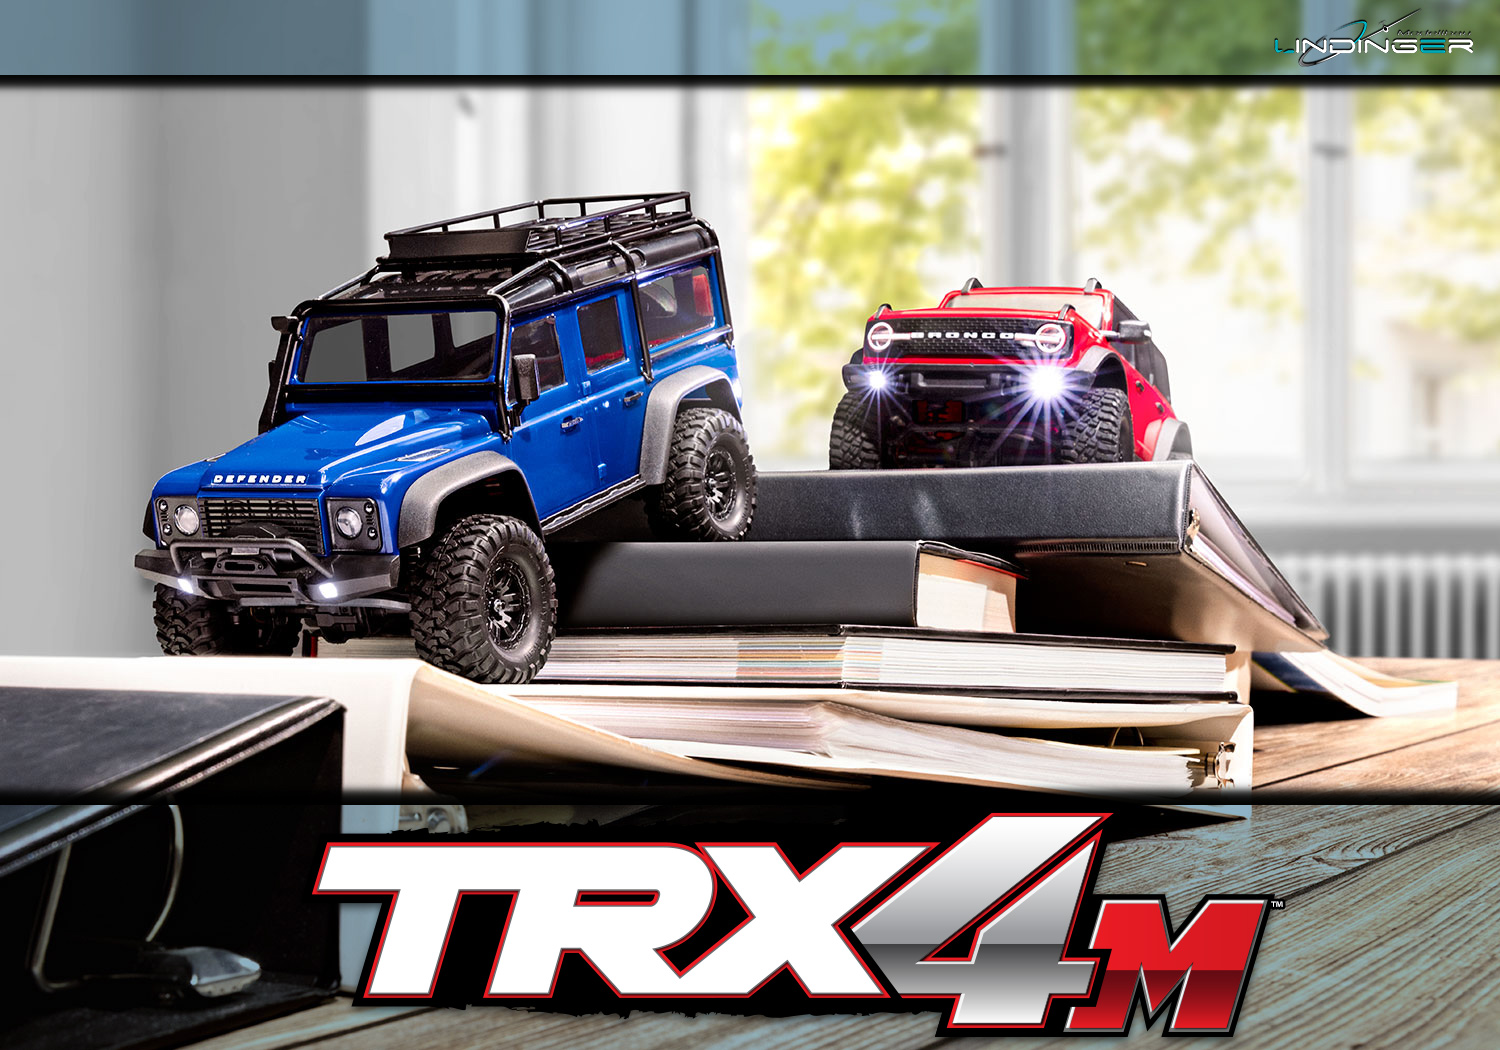 Traxxas TRX4M Review First Look - Crawler RC Cars bei Modellbau Lindinger